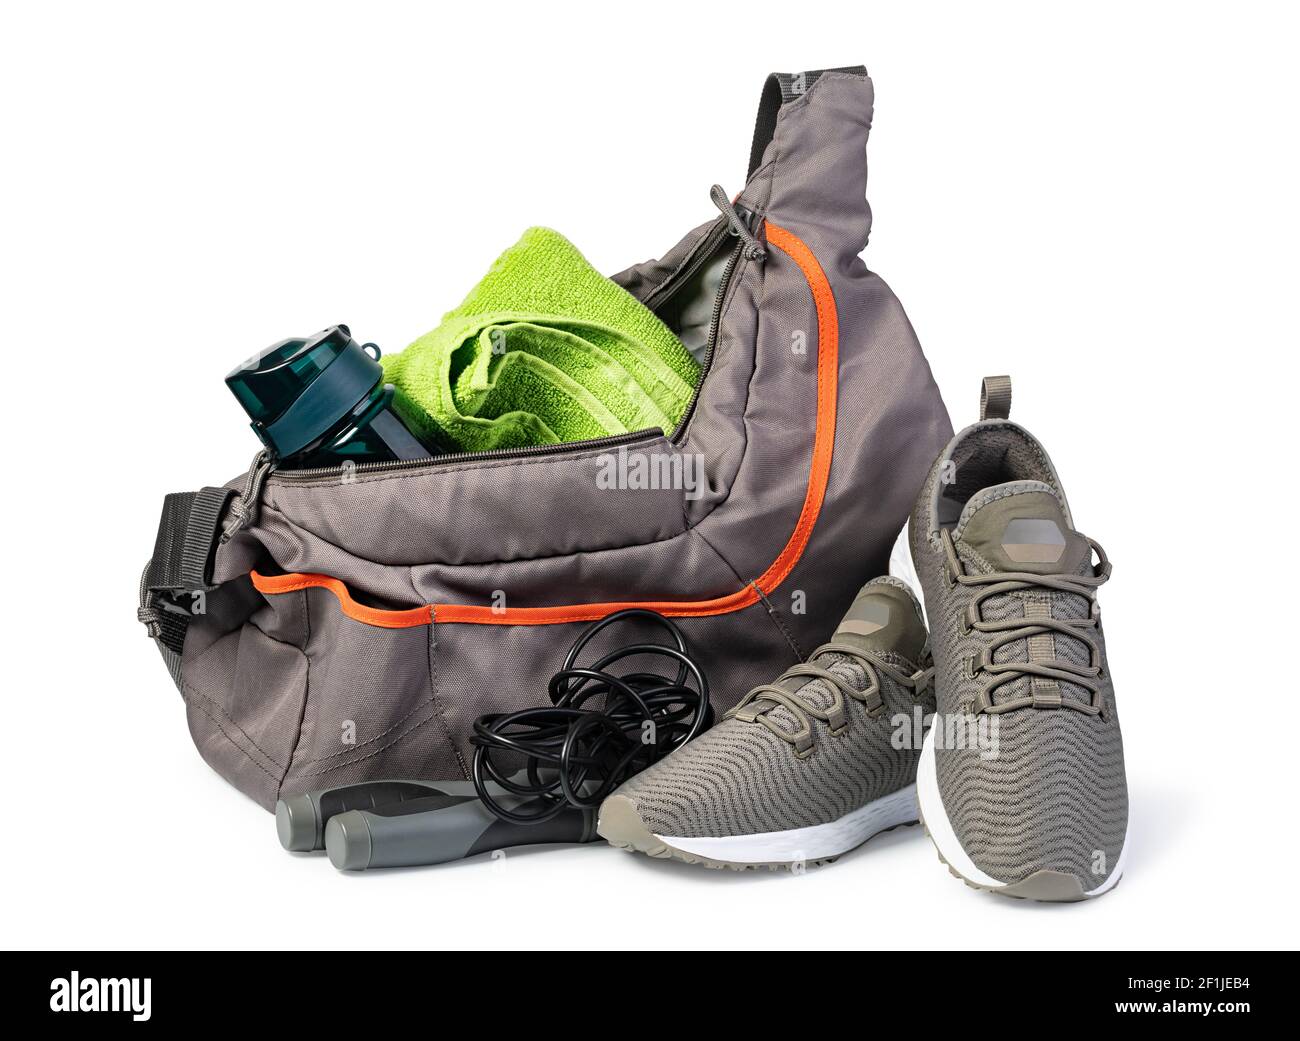 Sports bag with sports equipment Stock Photo